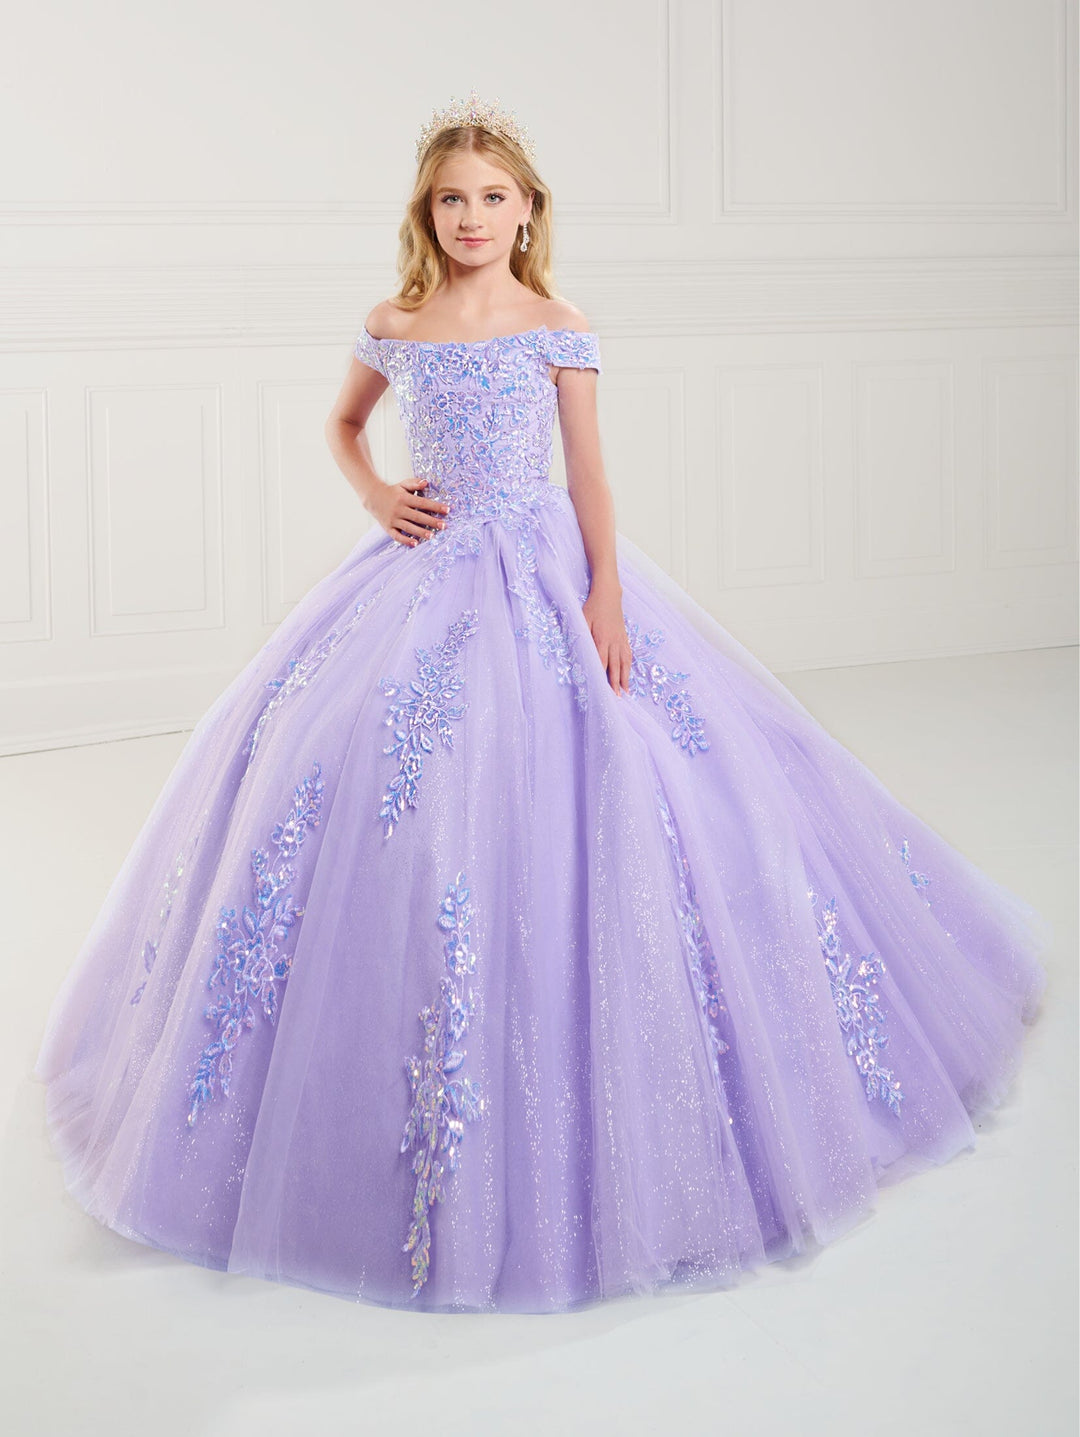 Girls Lace Applique Off Shoulder Gown by Tiffany Princess 13747